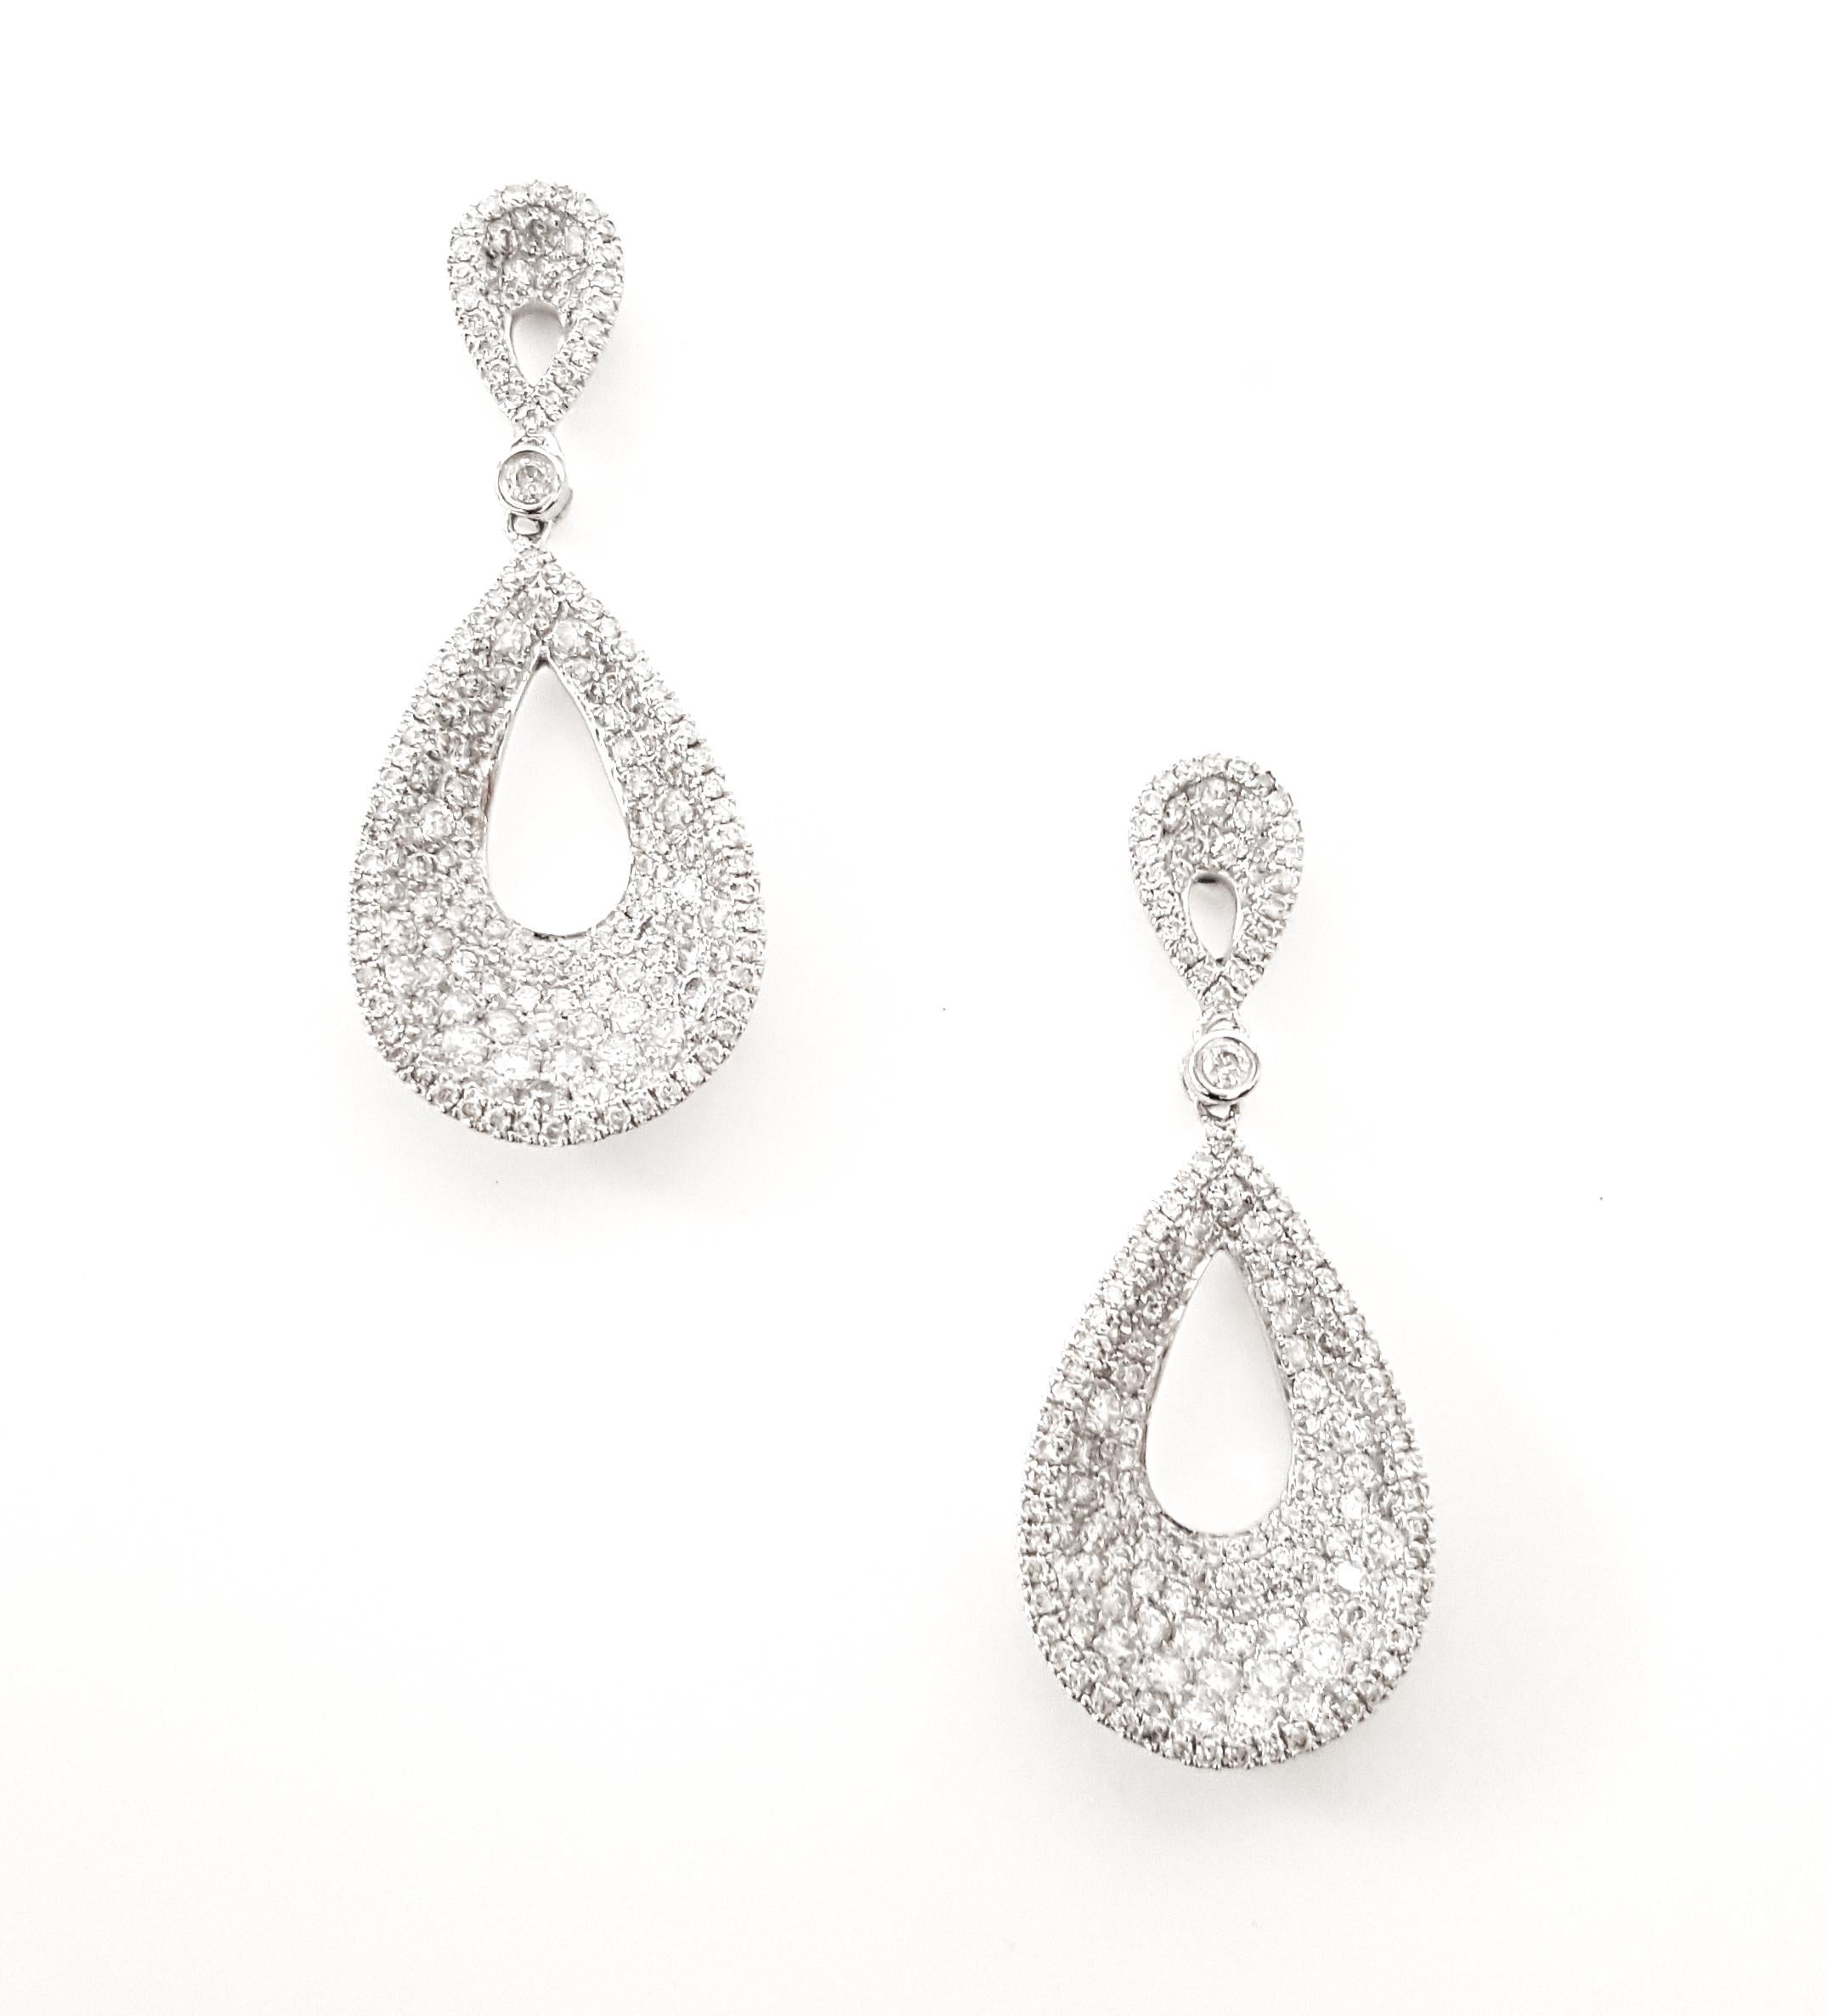 Embrace the brilliance of these dazzling 14 karat white gold diamond dangling earrings, a masterpiece of modern elegance. Each earring features a captivating 1.82 carat round-cut diamond, expertly set within a unique concave design, creating an